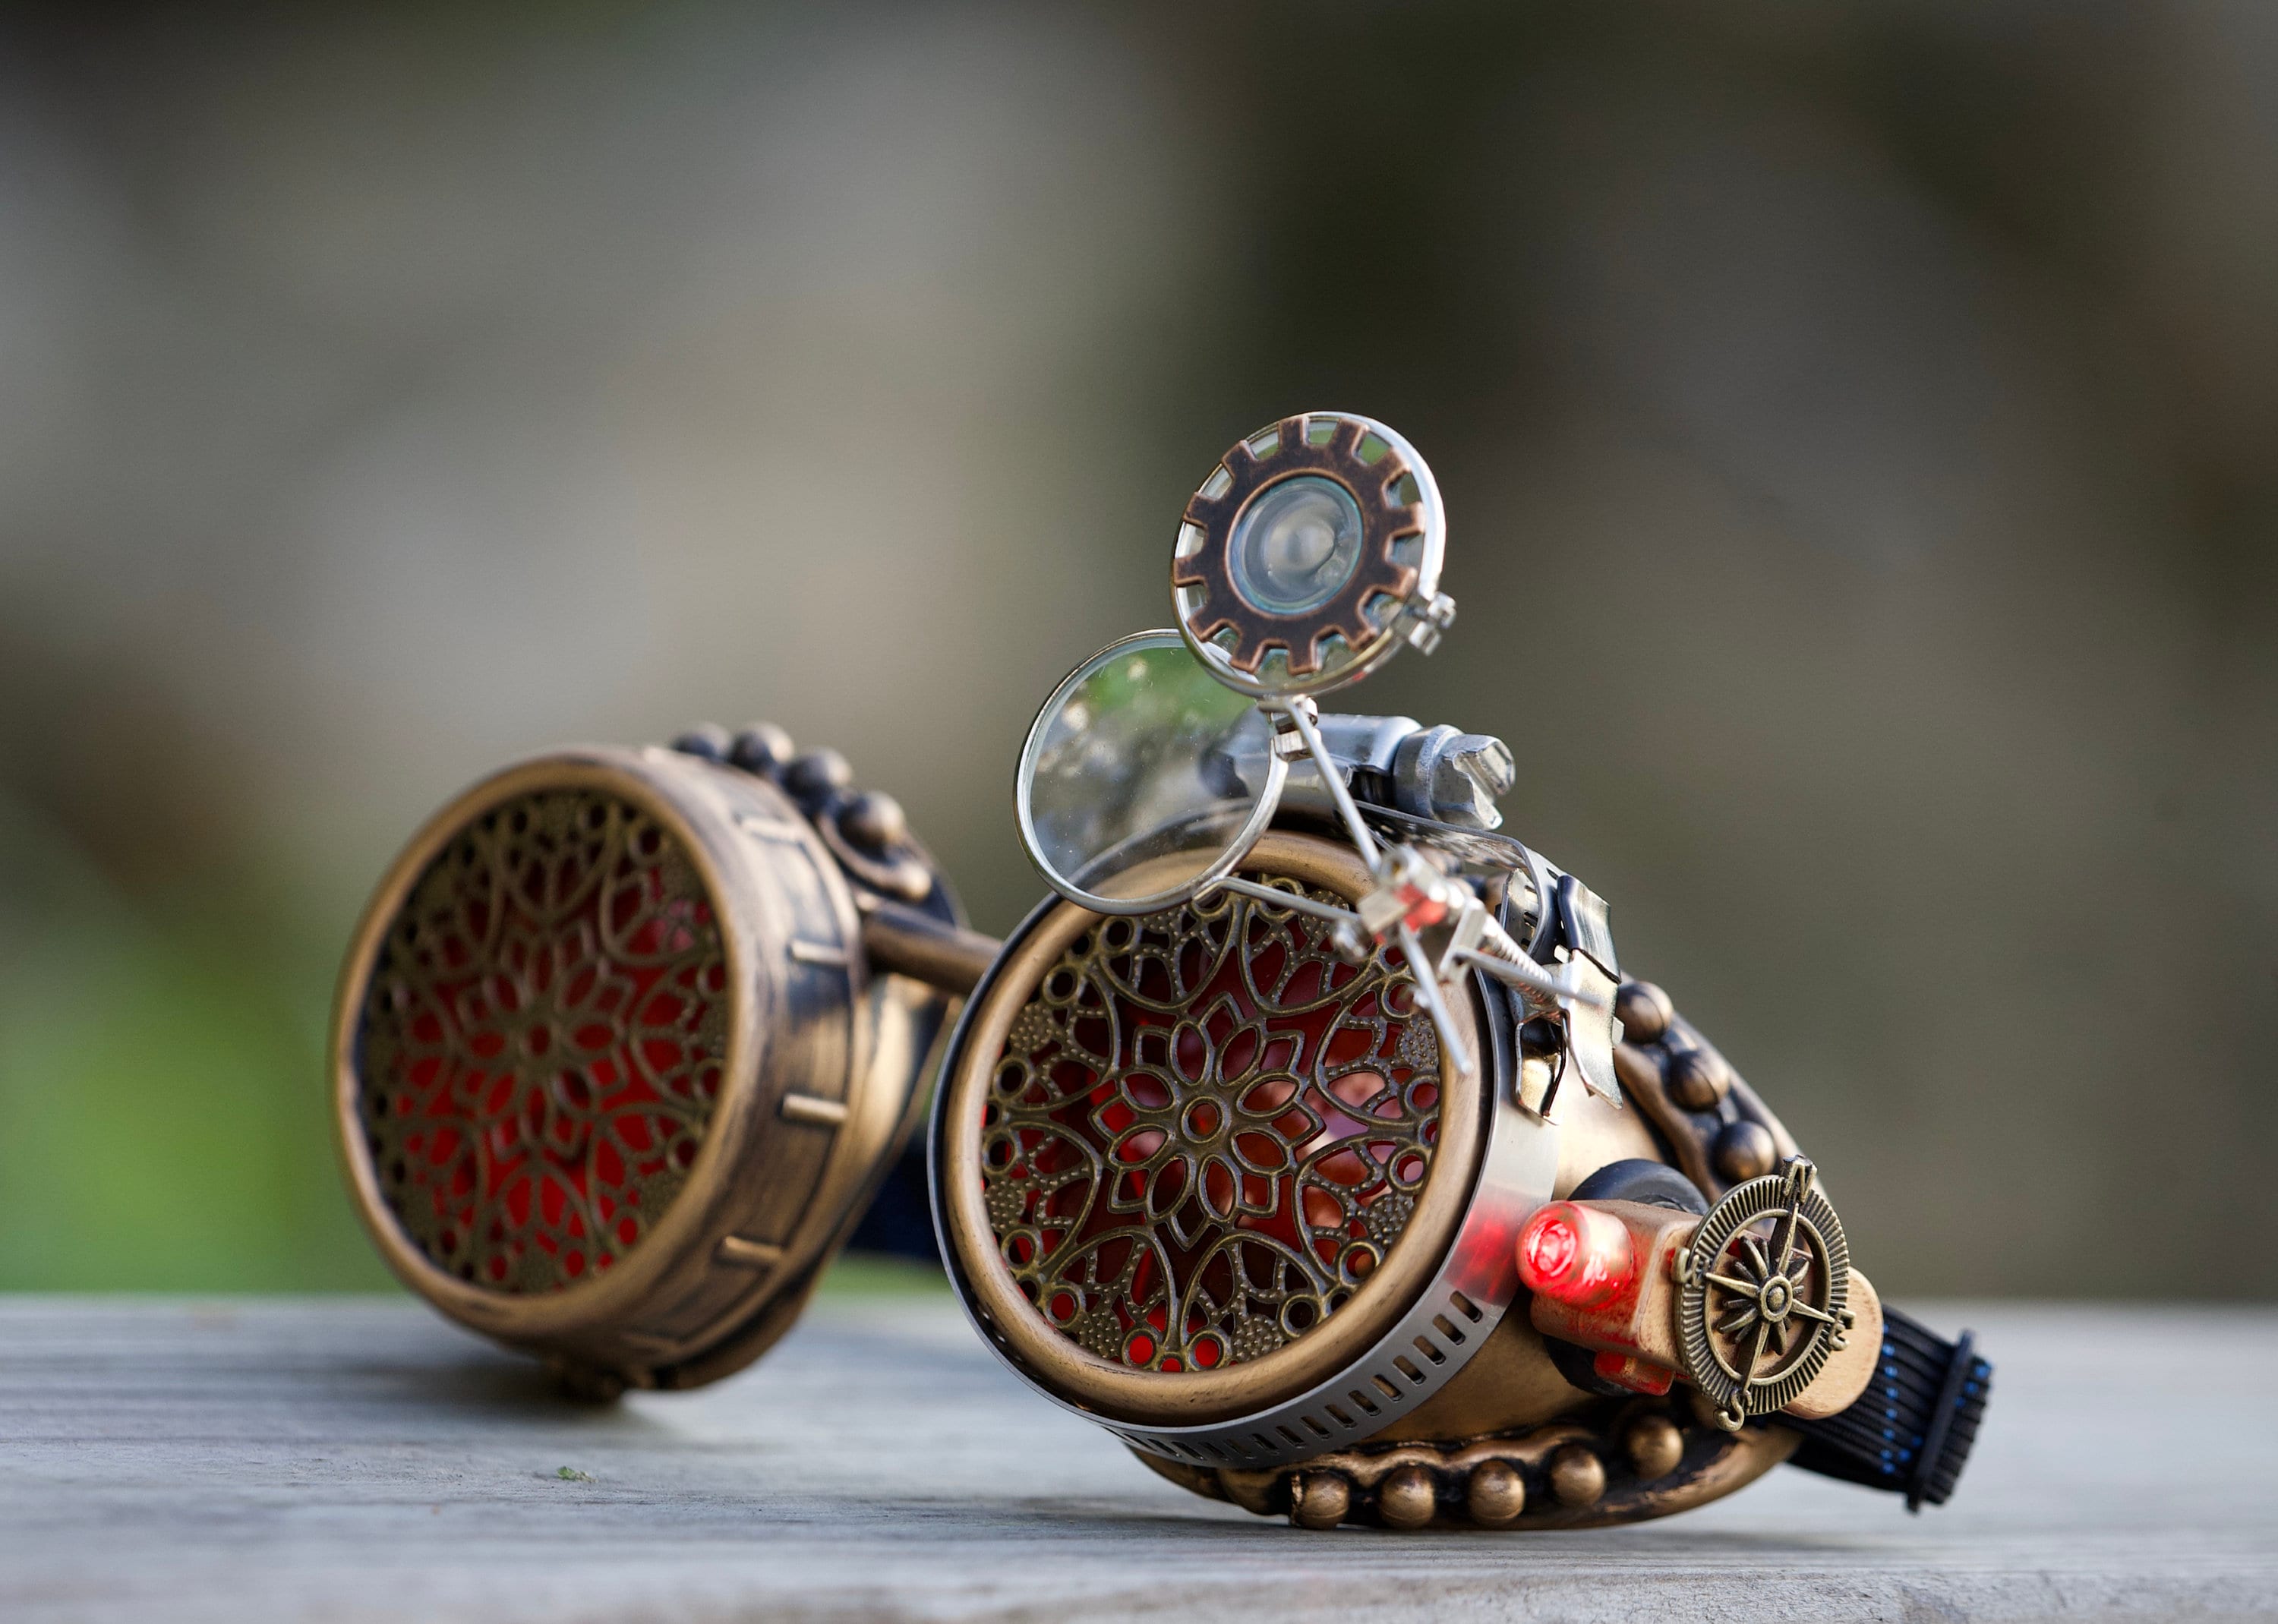 10 Amazing Steampunk Costume Ideas and accessories made from foam